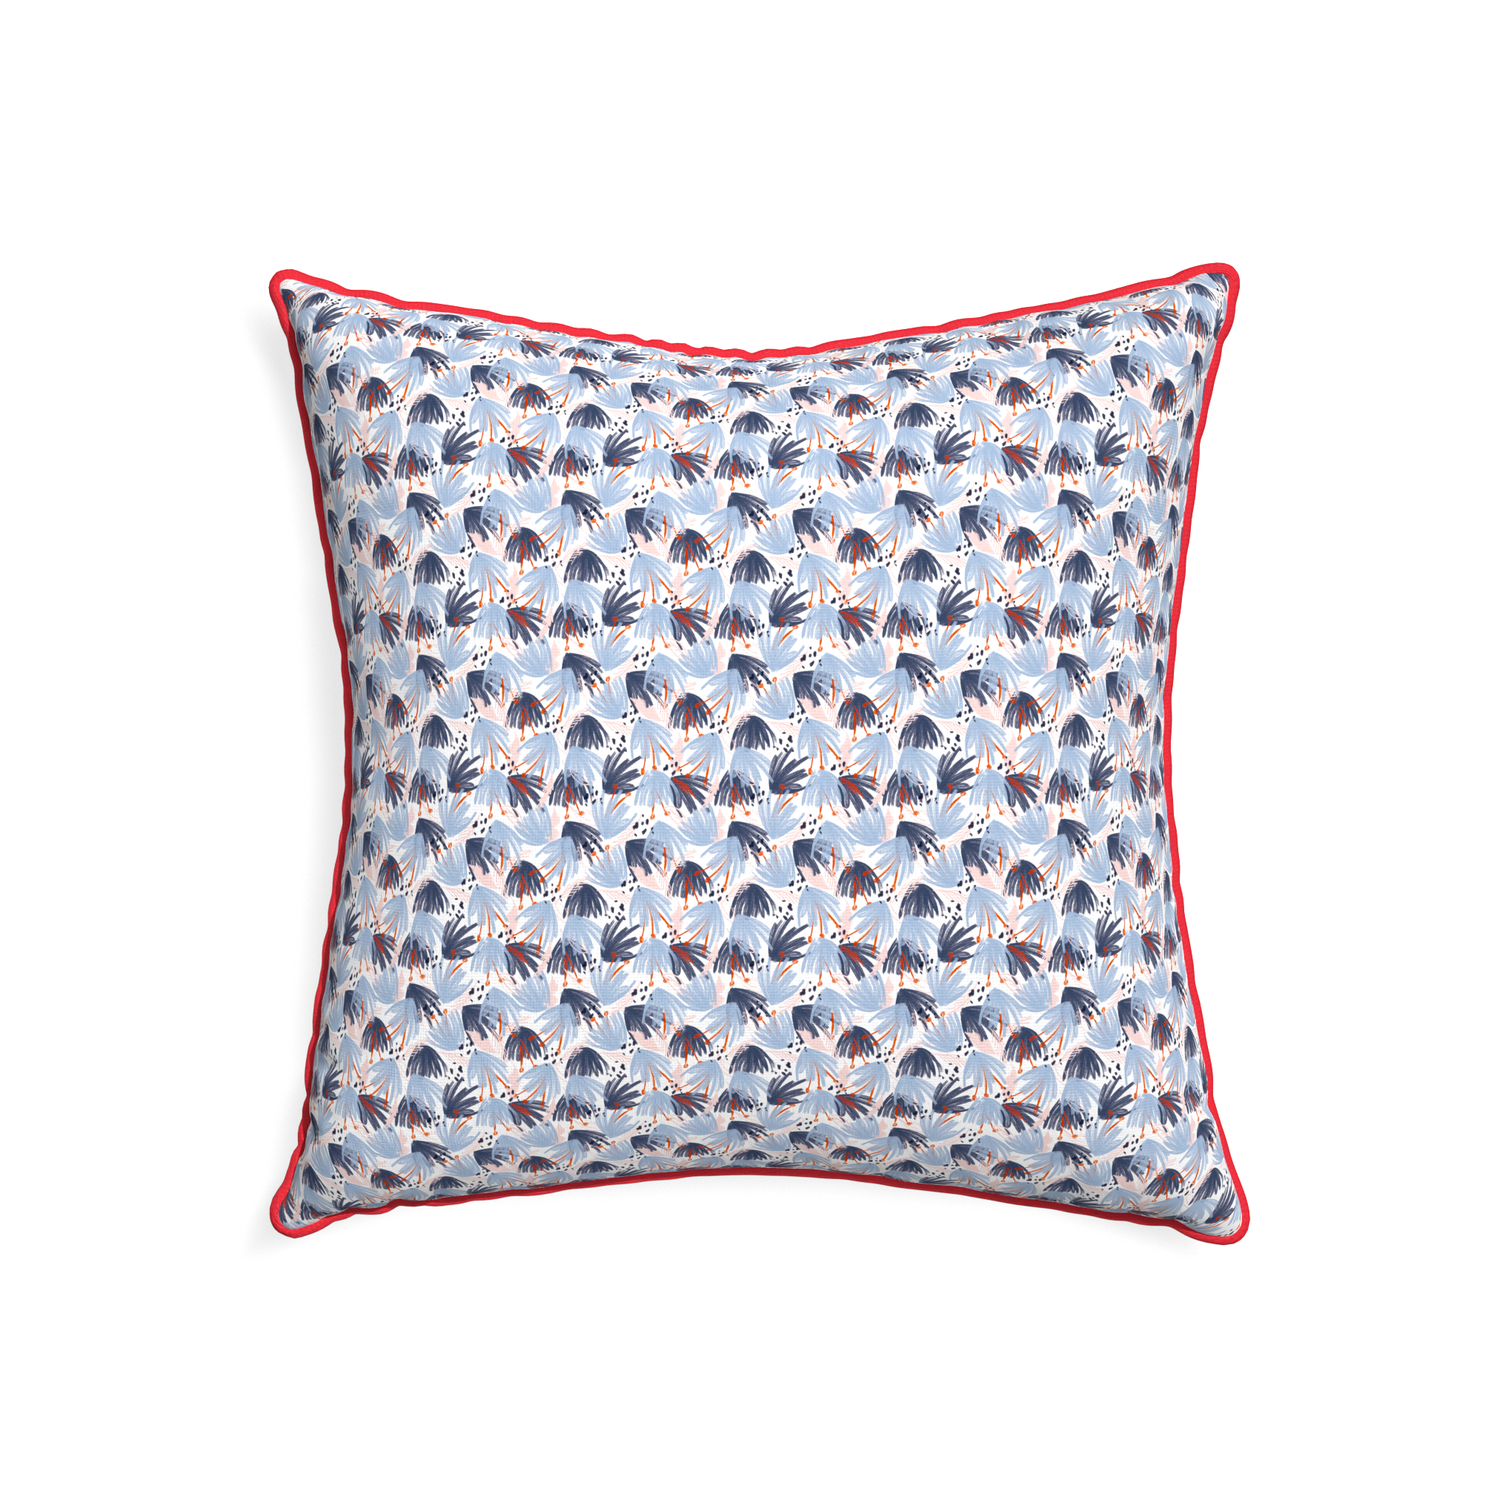 22-square eden blue custom pillow with cherry piping on white background